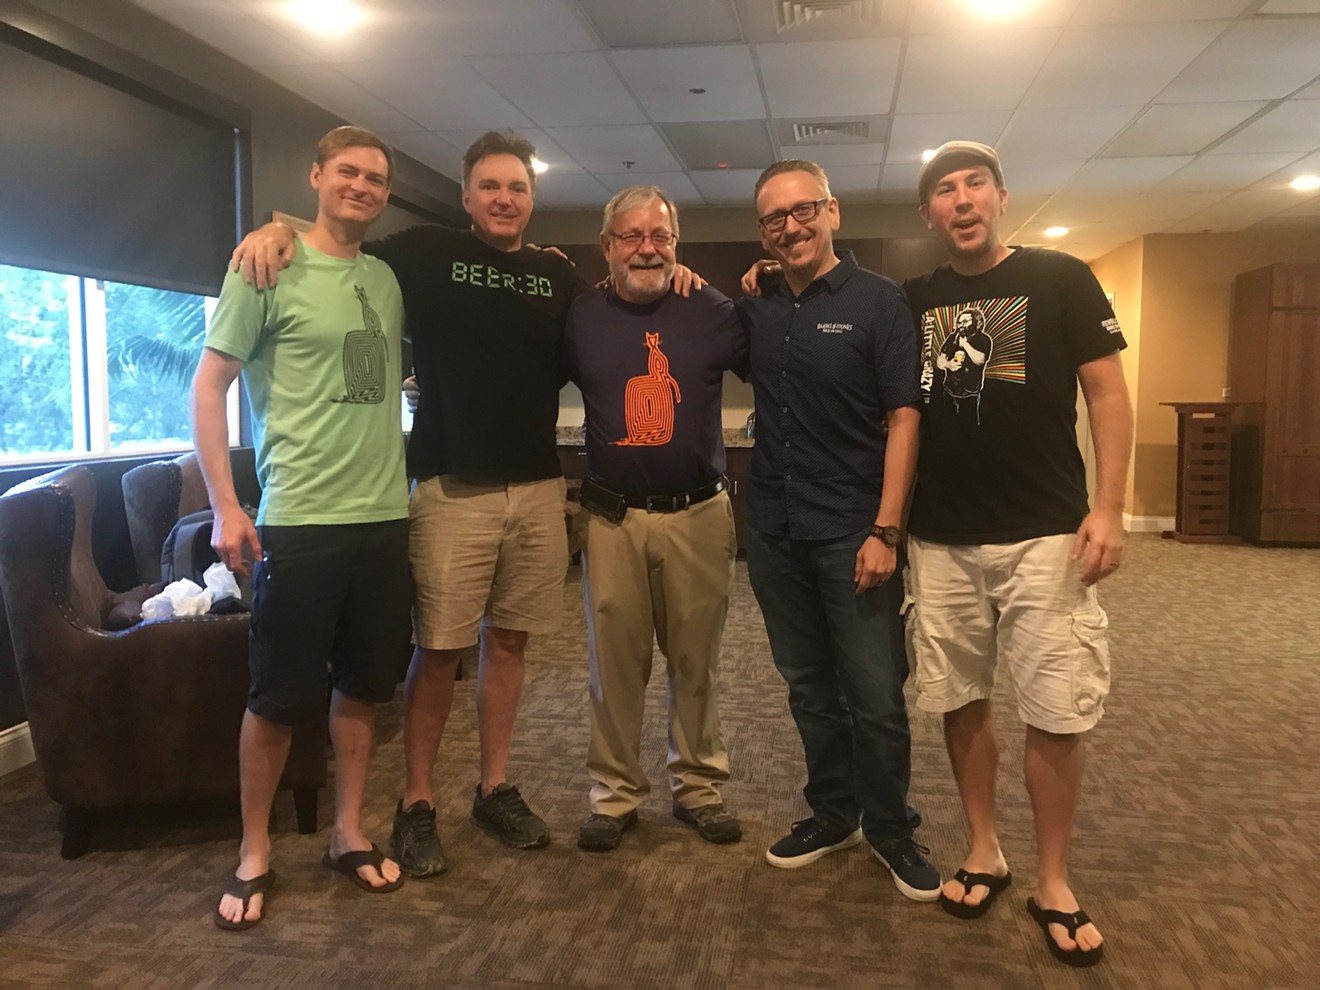 Odd Breed's Matt Manthe (Far Left) and Daniel Naumko (Far Right) with the Barrel of Monks team (from left to right) Keith DeLoach, Bill McFee and Kevin Abbott.